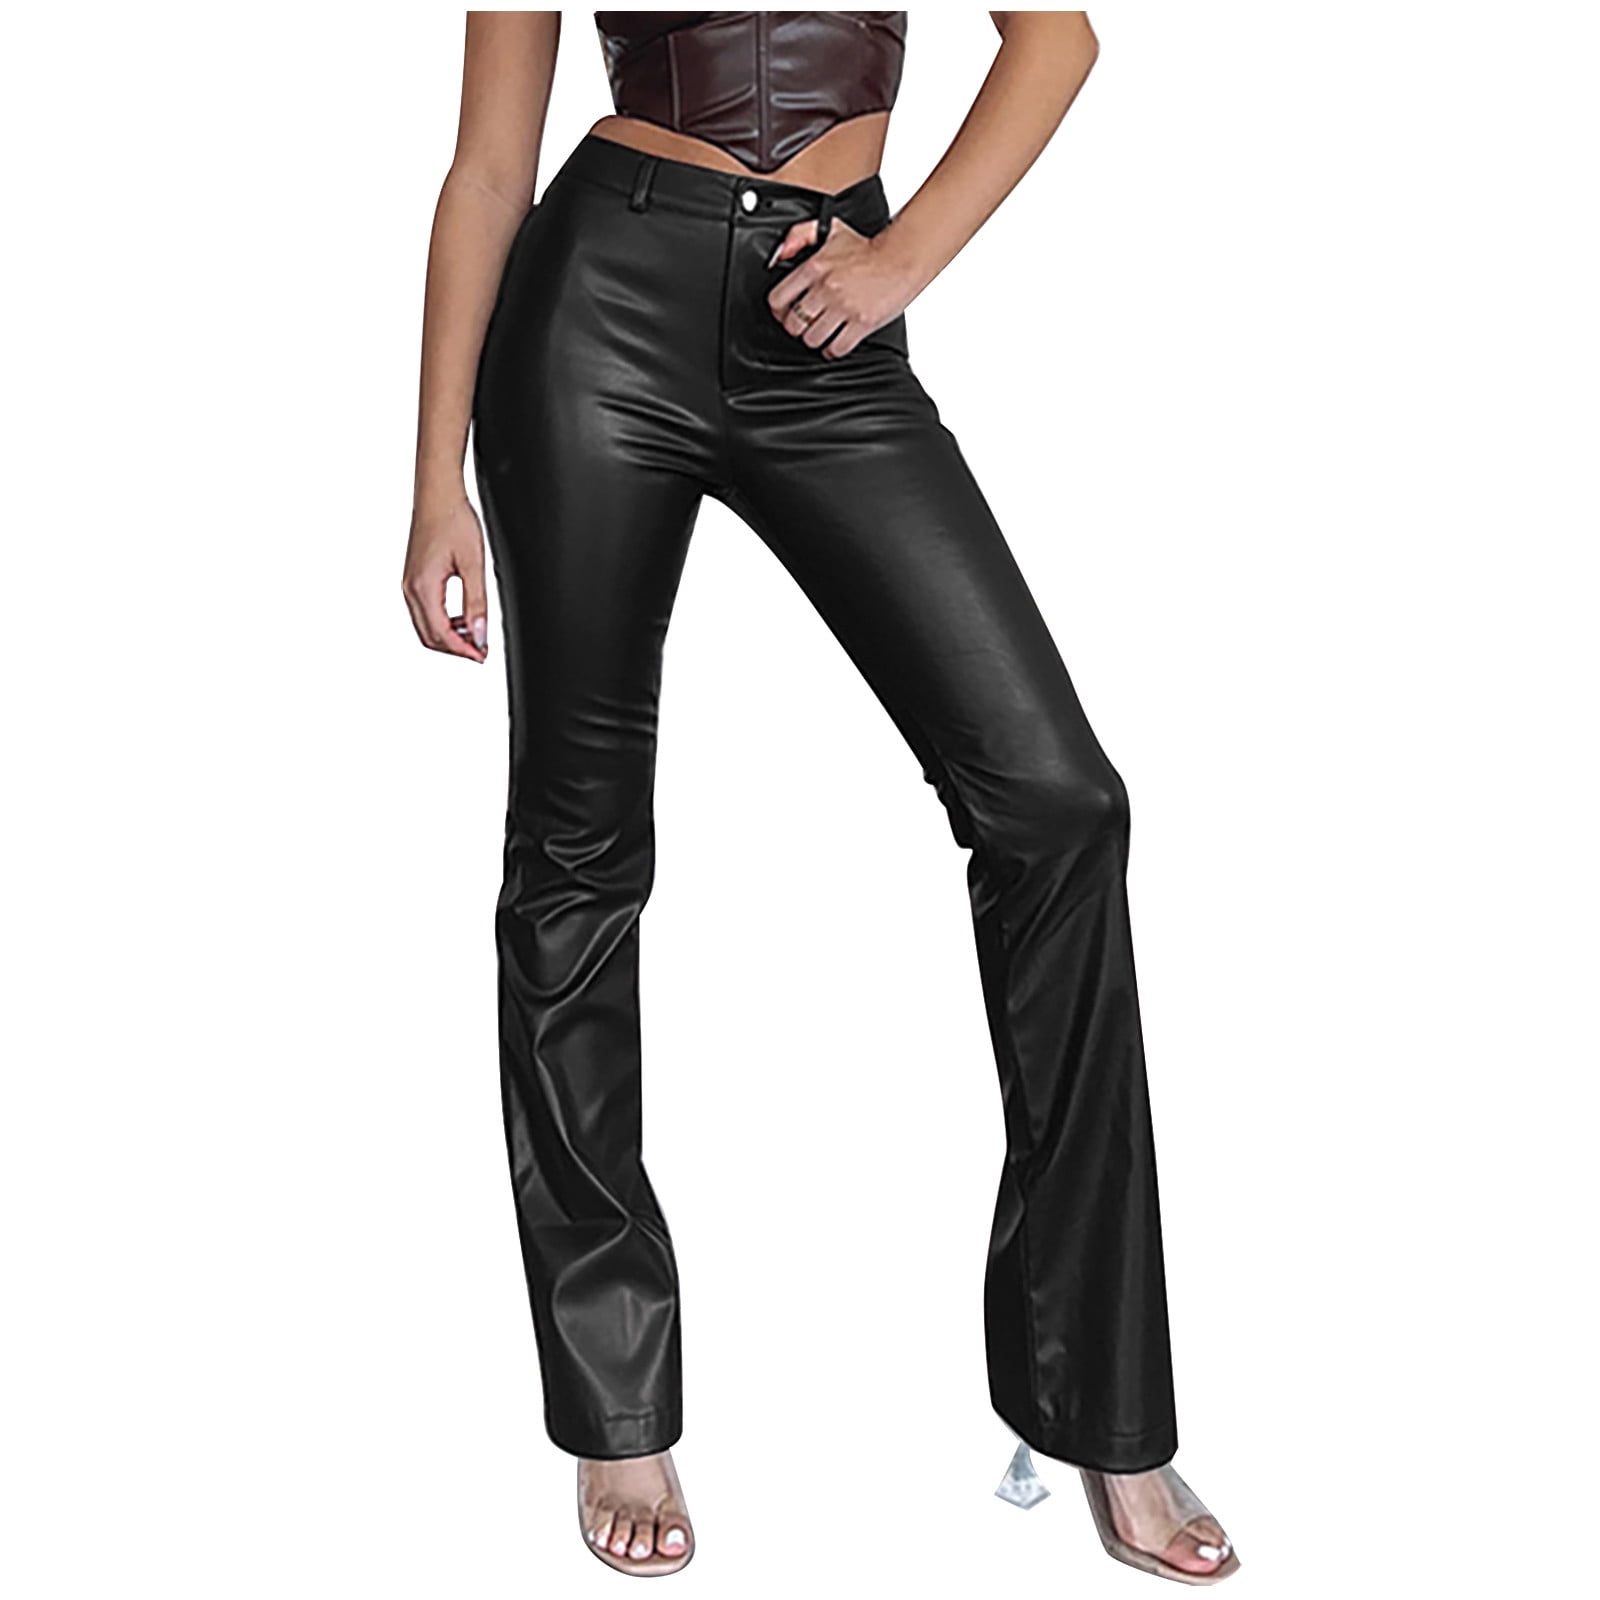 Chic Leather Pants Outfits To Wear Now | Le Chic Street